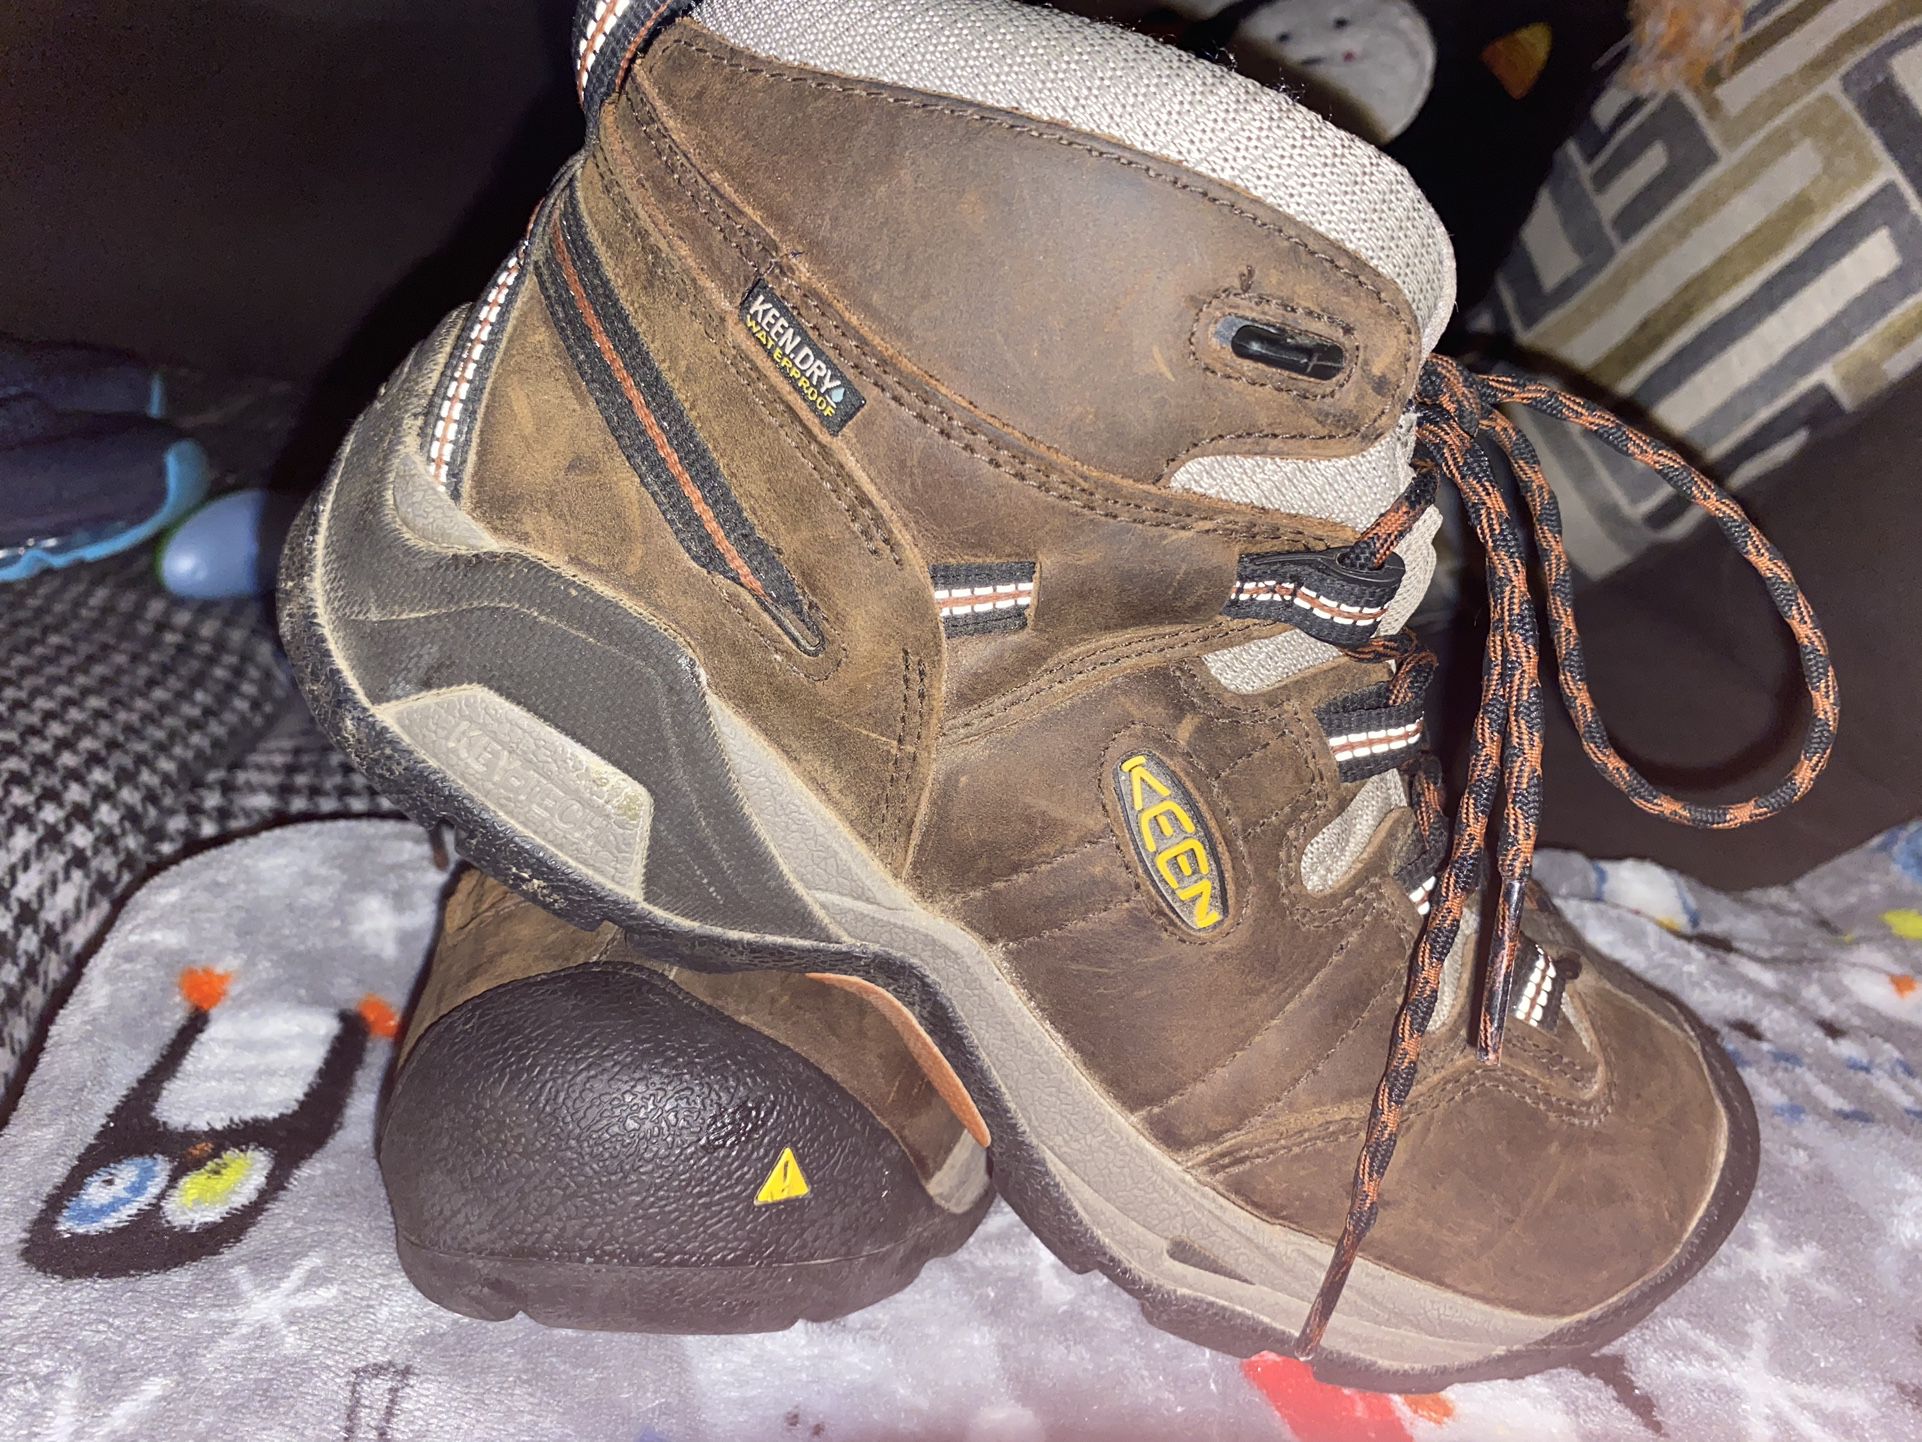 REDUCED! - Keen Hiking Boot - Size 8.5